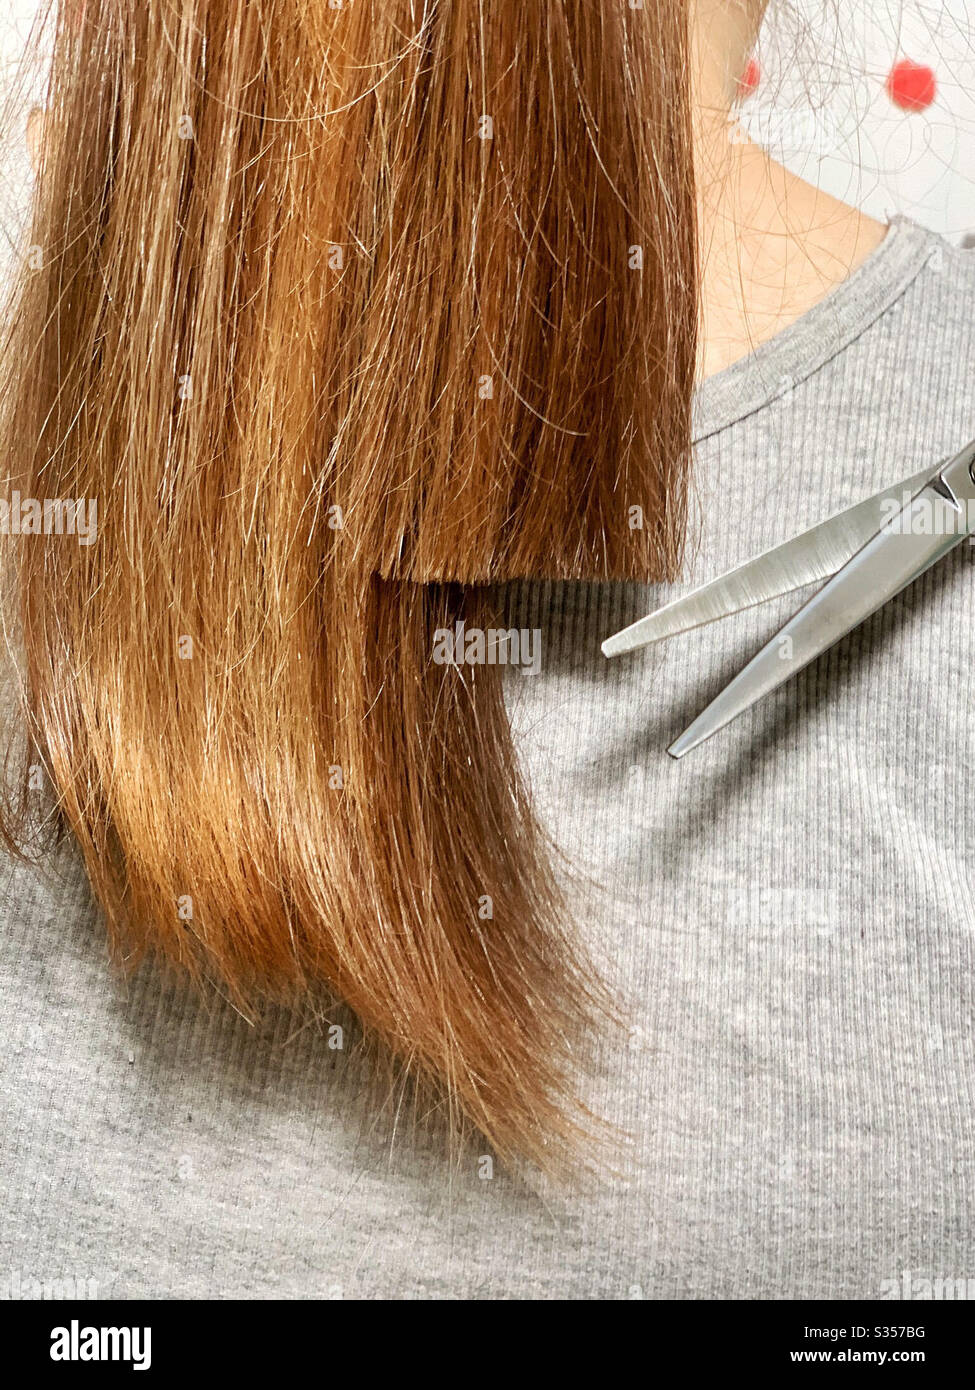 Woman cutting own hair with scissors Stock Photo - Alamy